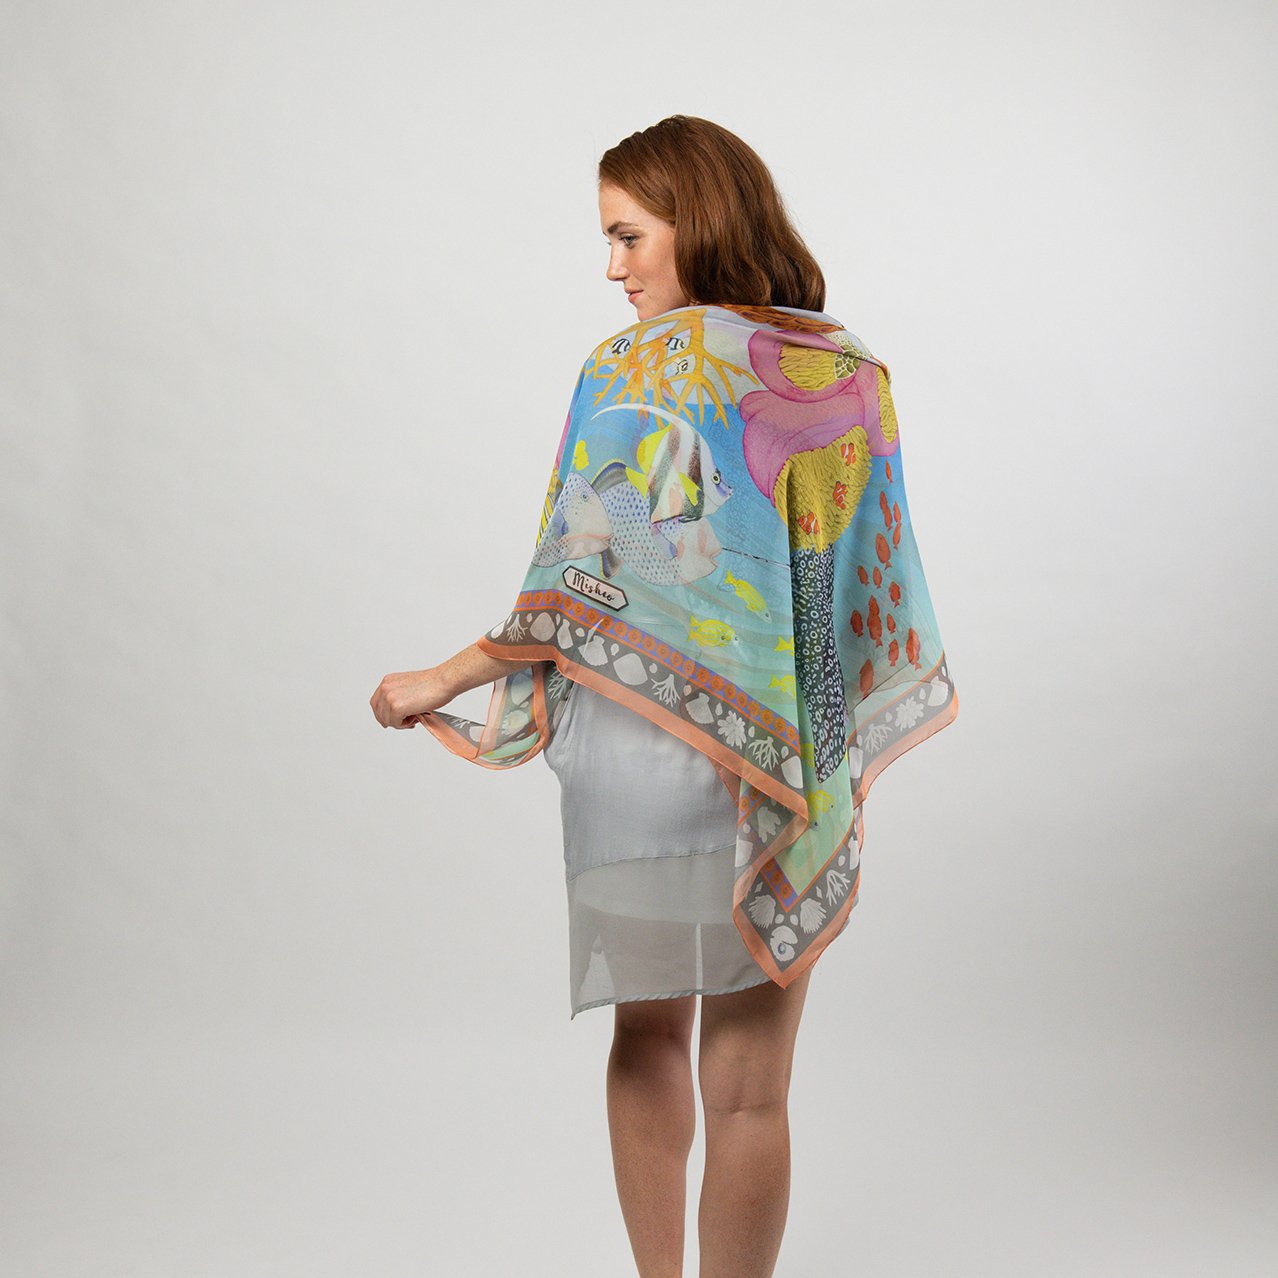 Island Life: Beneath the Water Silk Square Scarf Teal & Coral